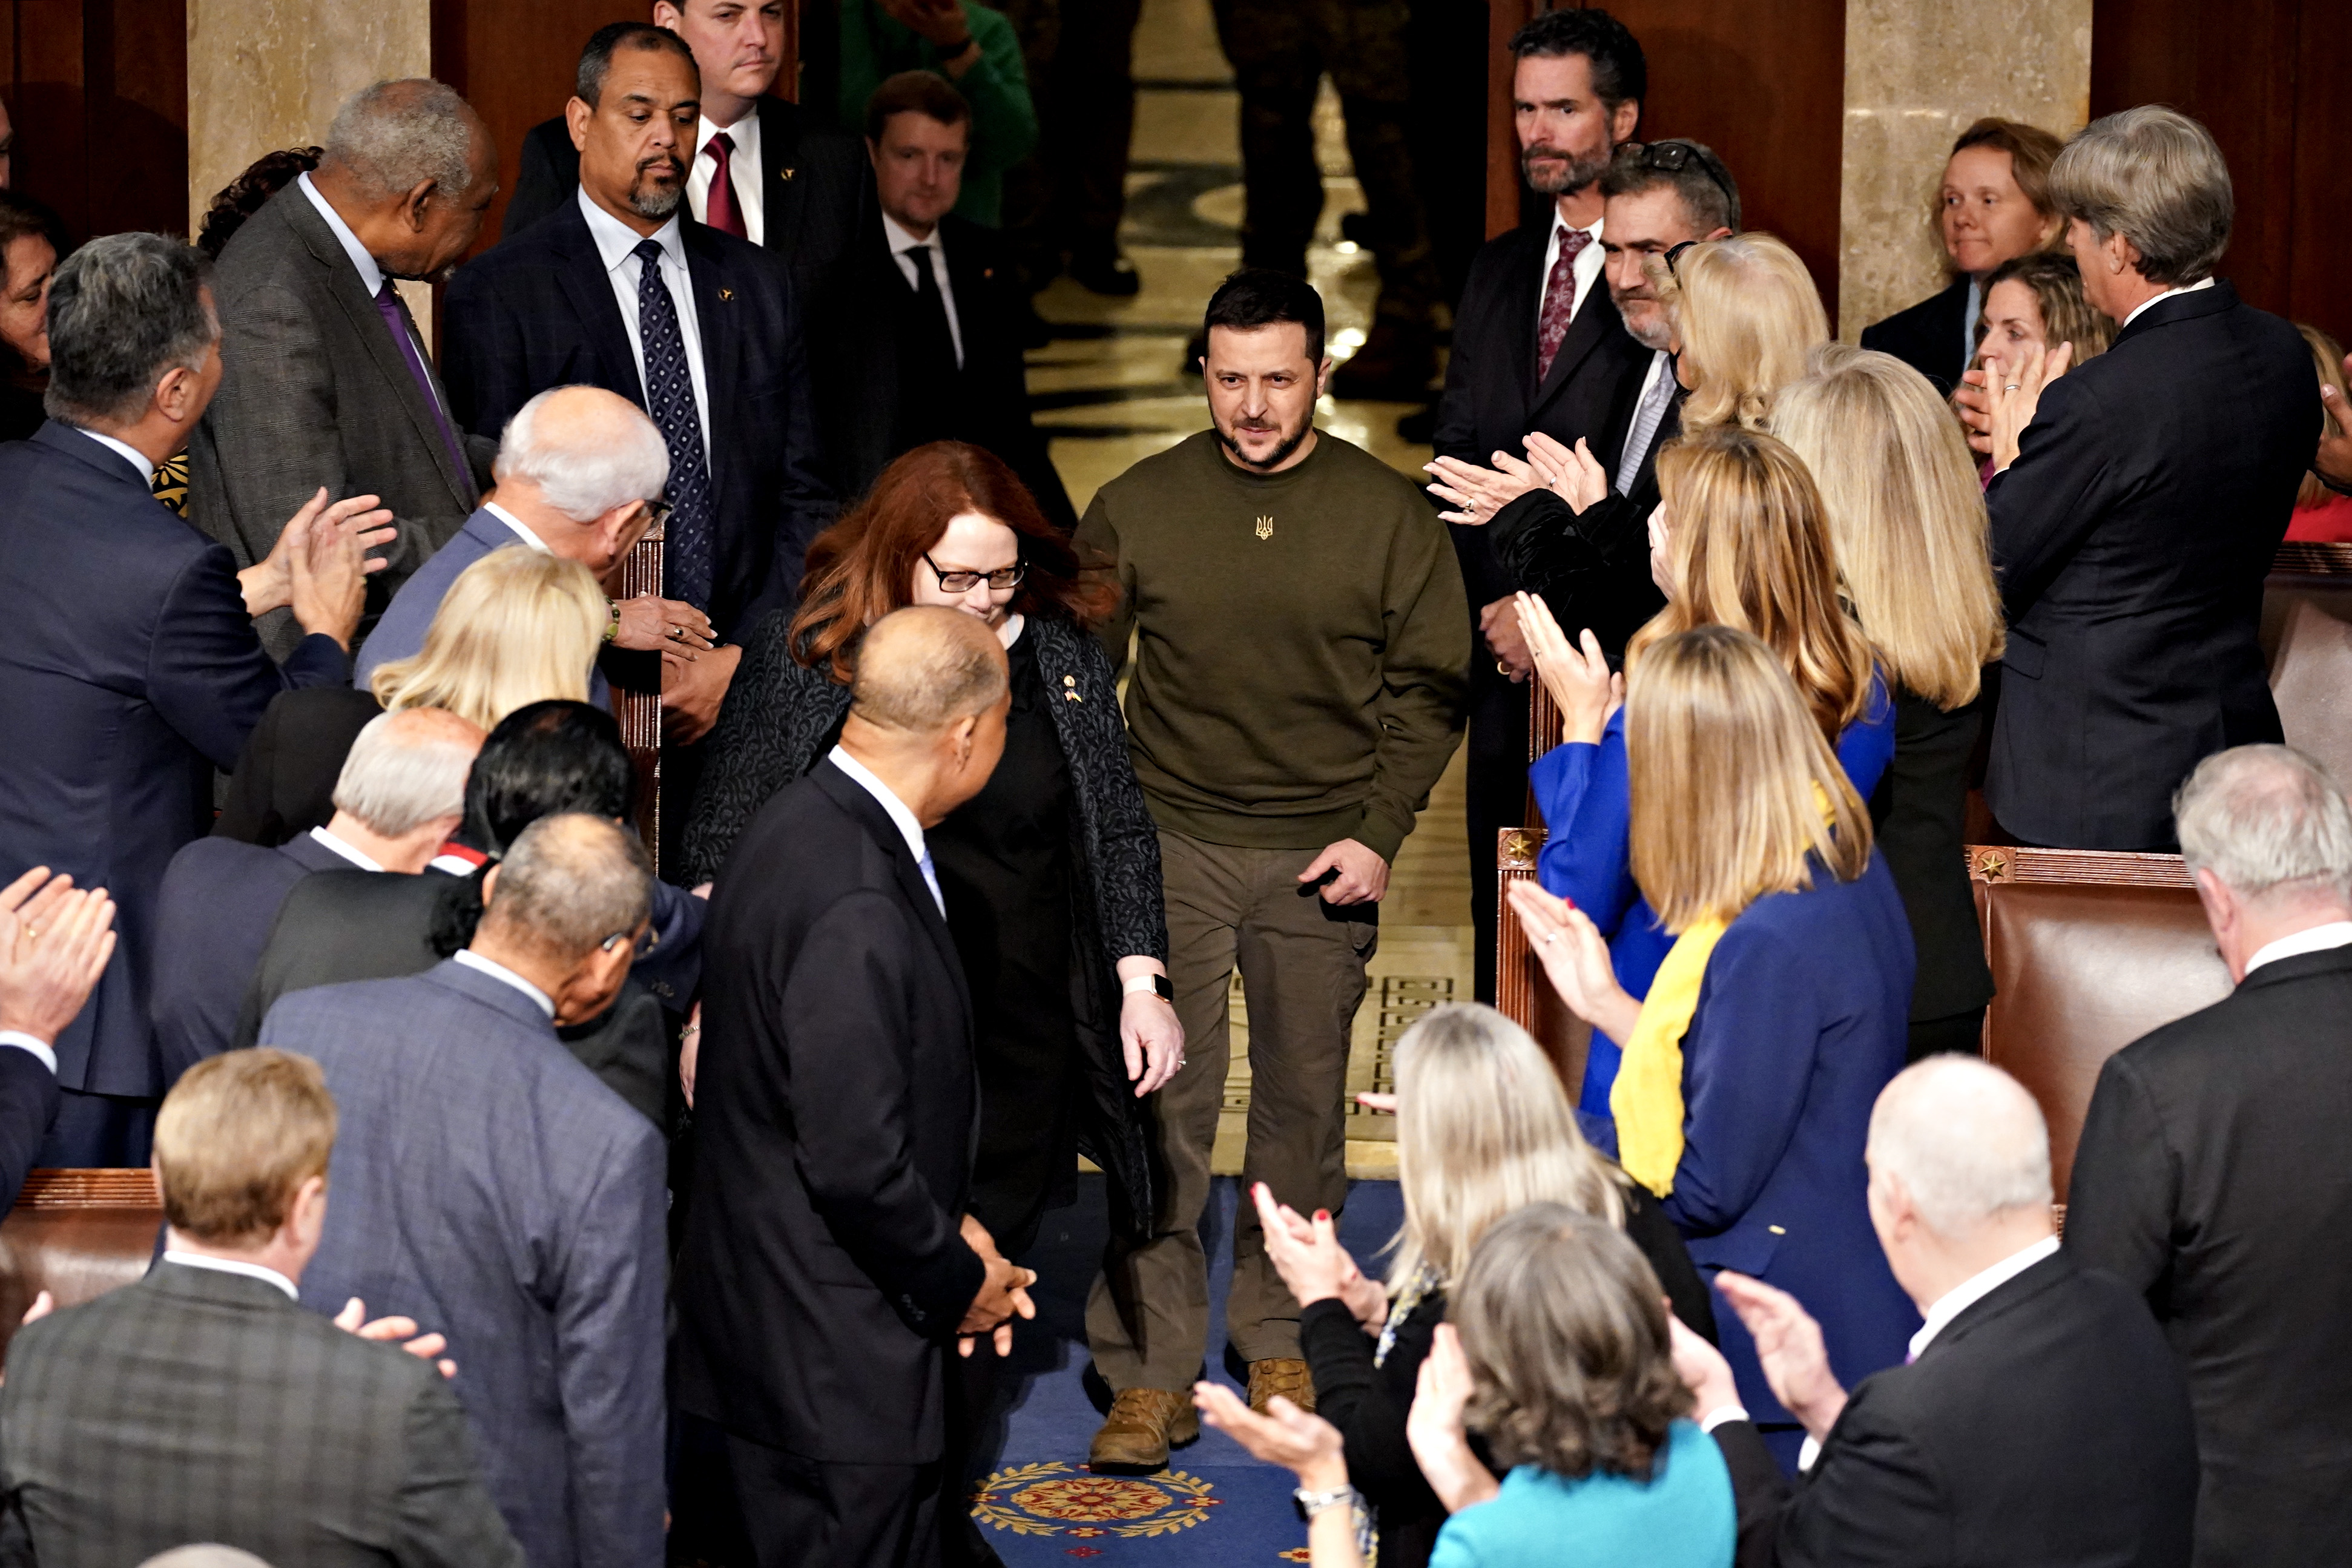 Volodymyr Zelensky, center, arrives to speak during a joint meeting of Congress at the US Capitol in Washington, DC on Wednesday.